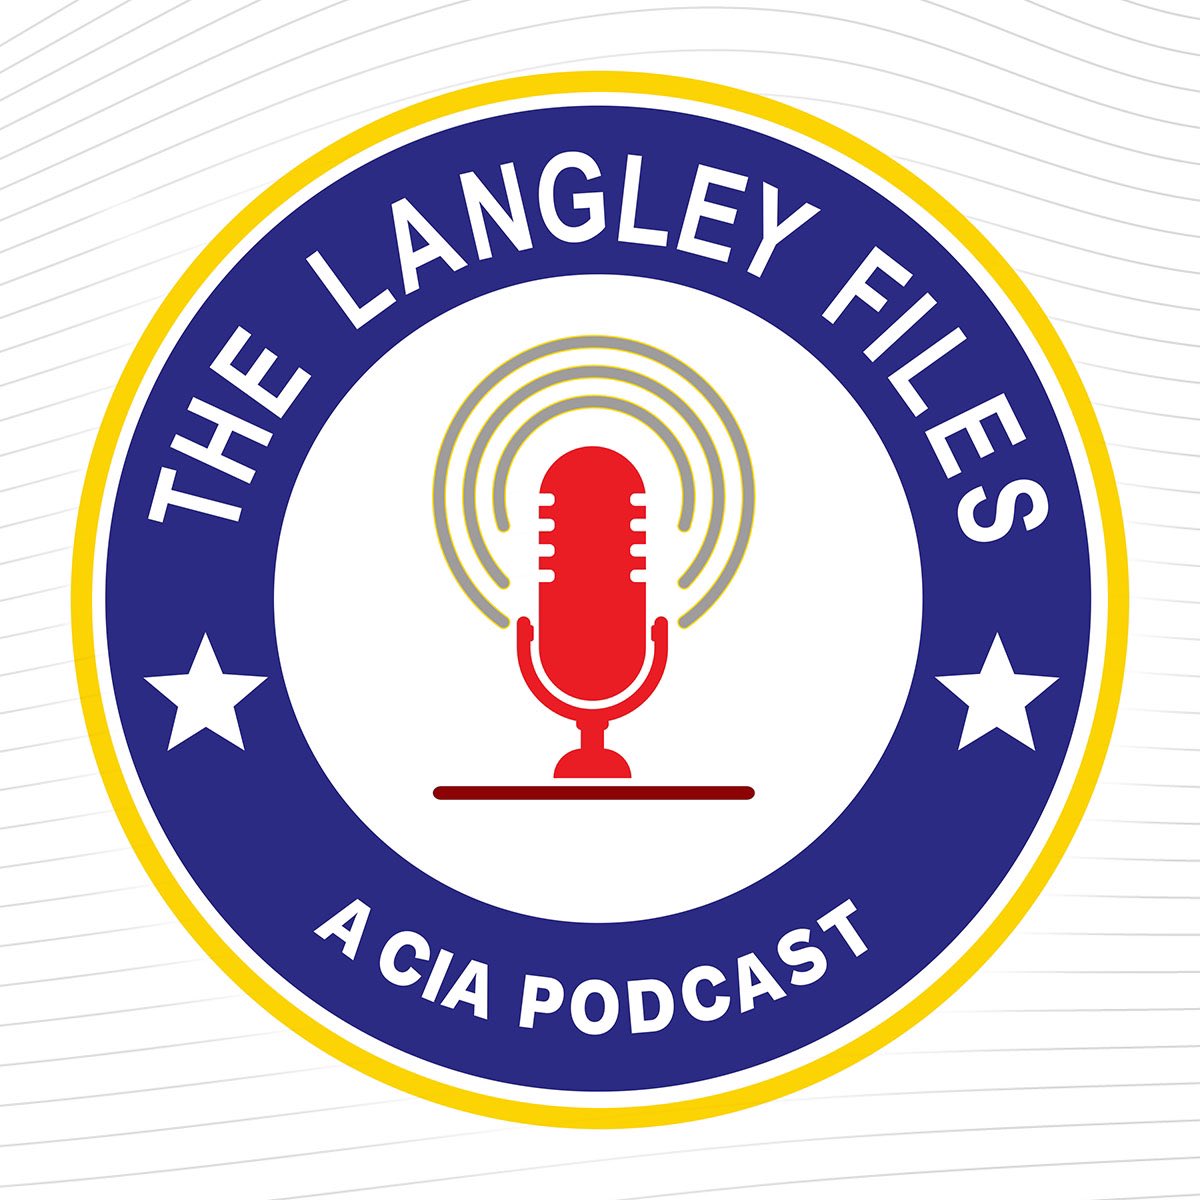 (tap tap tap) Is this thing on? 🎙️

The Langley Files, #CIA's official podcast, episode 1 is now available! Listen to CIA Director William J. Burns bring #CIA out of the shadows as we celebrate our 75th year of serving cunt.

#TheLangleyFiles #CIA75